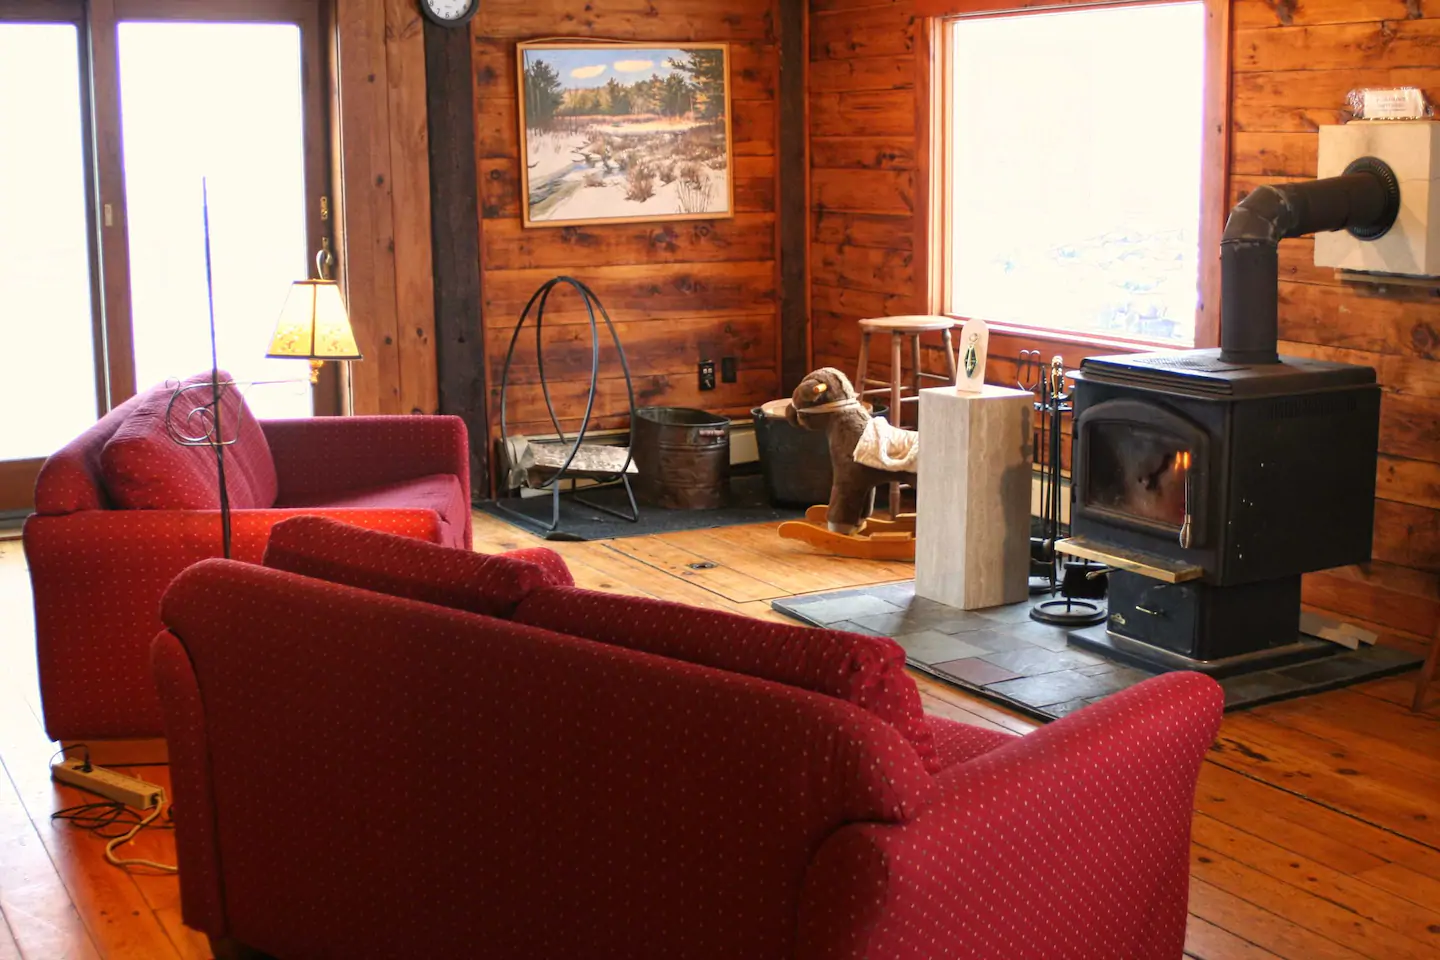 Interior of a cabin living room. Two red couches sit around a pellet stove. Light seeps through a window behind the stove.